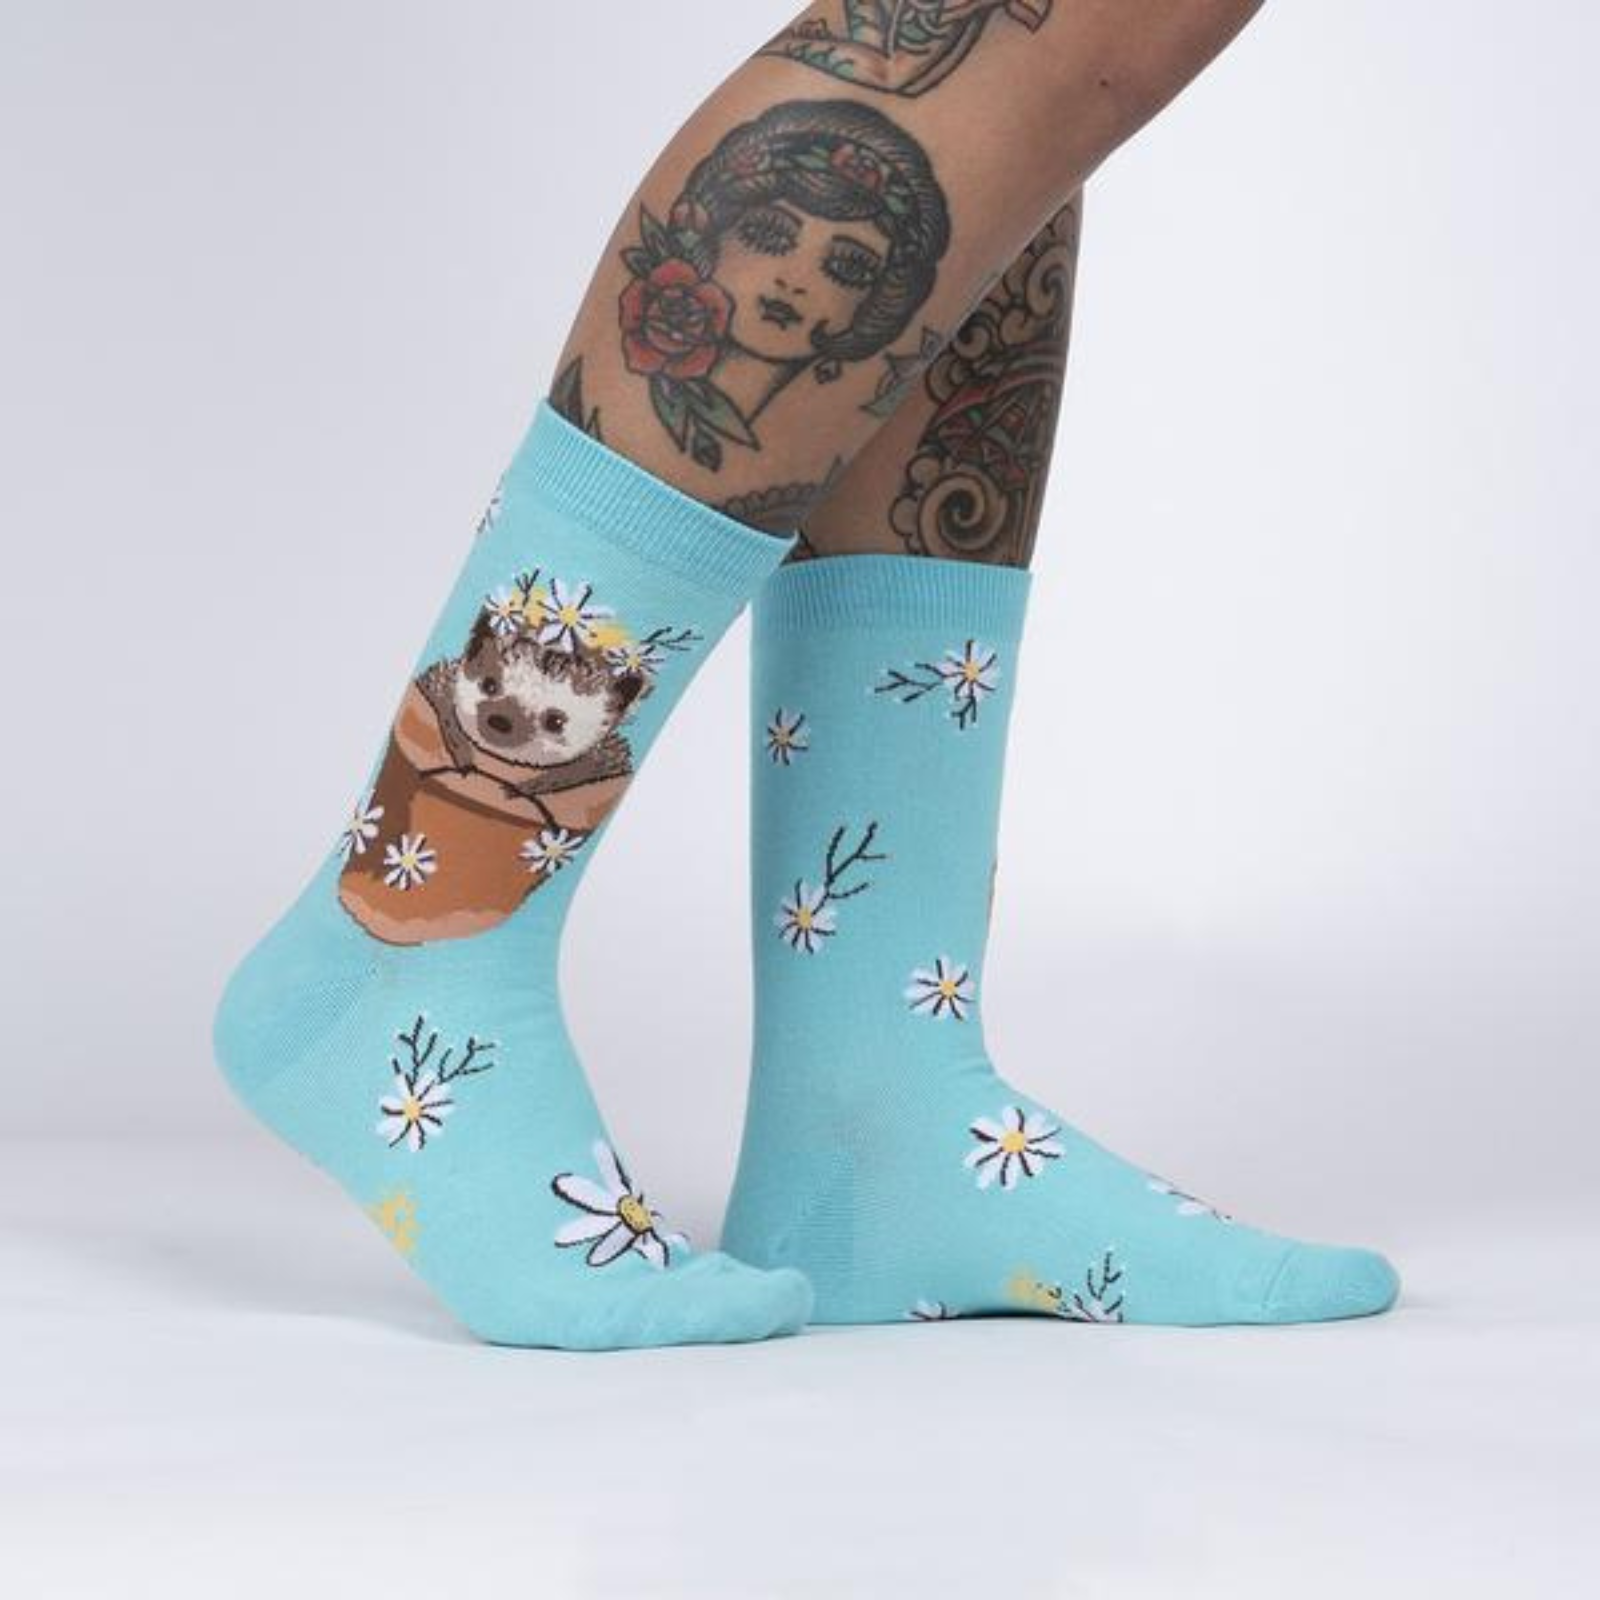 Sock It To Me My Dear Hedgehog women's crew sock featuring light blue sock with flowers all over and a hedgehog in a flower pot. Socks worn by model seen from side. 